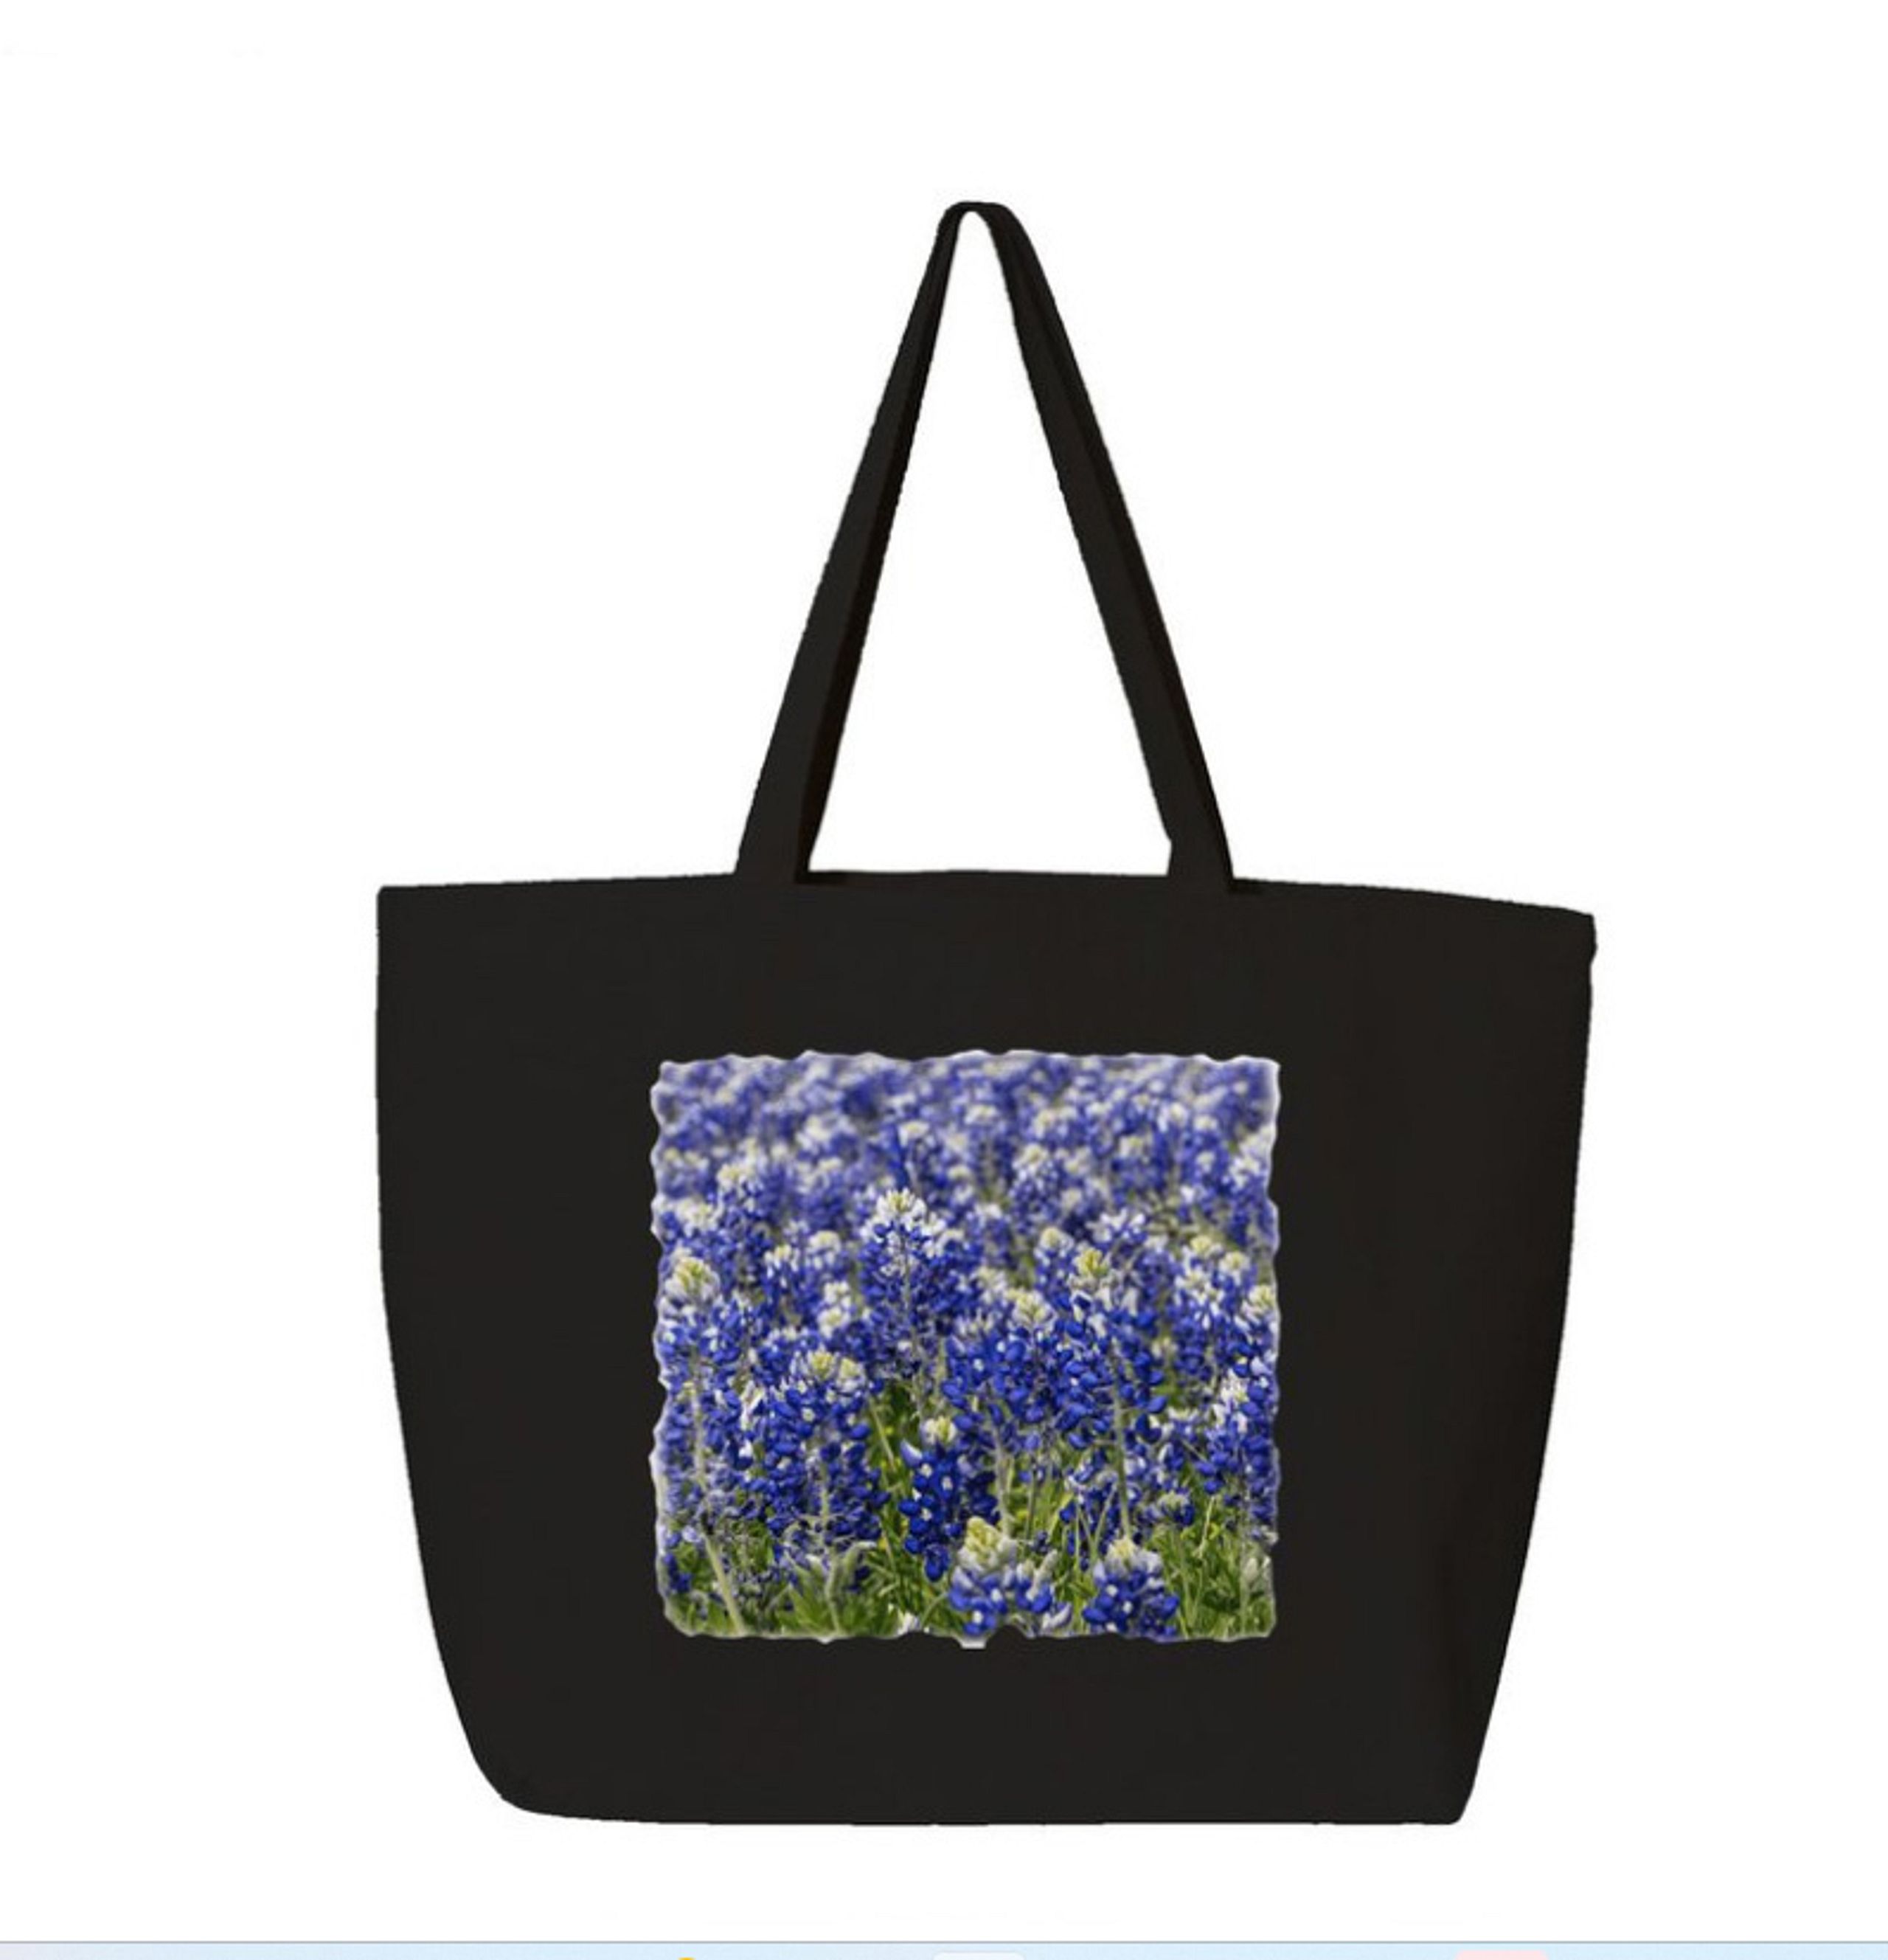 Jumbo Tote in 2 Colors with Bluebonnets